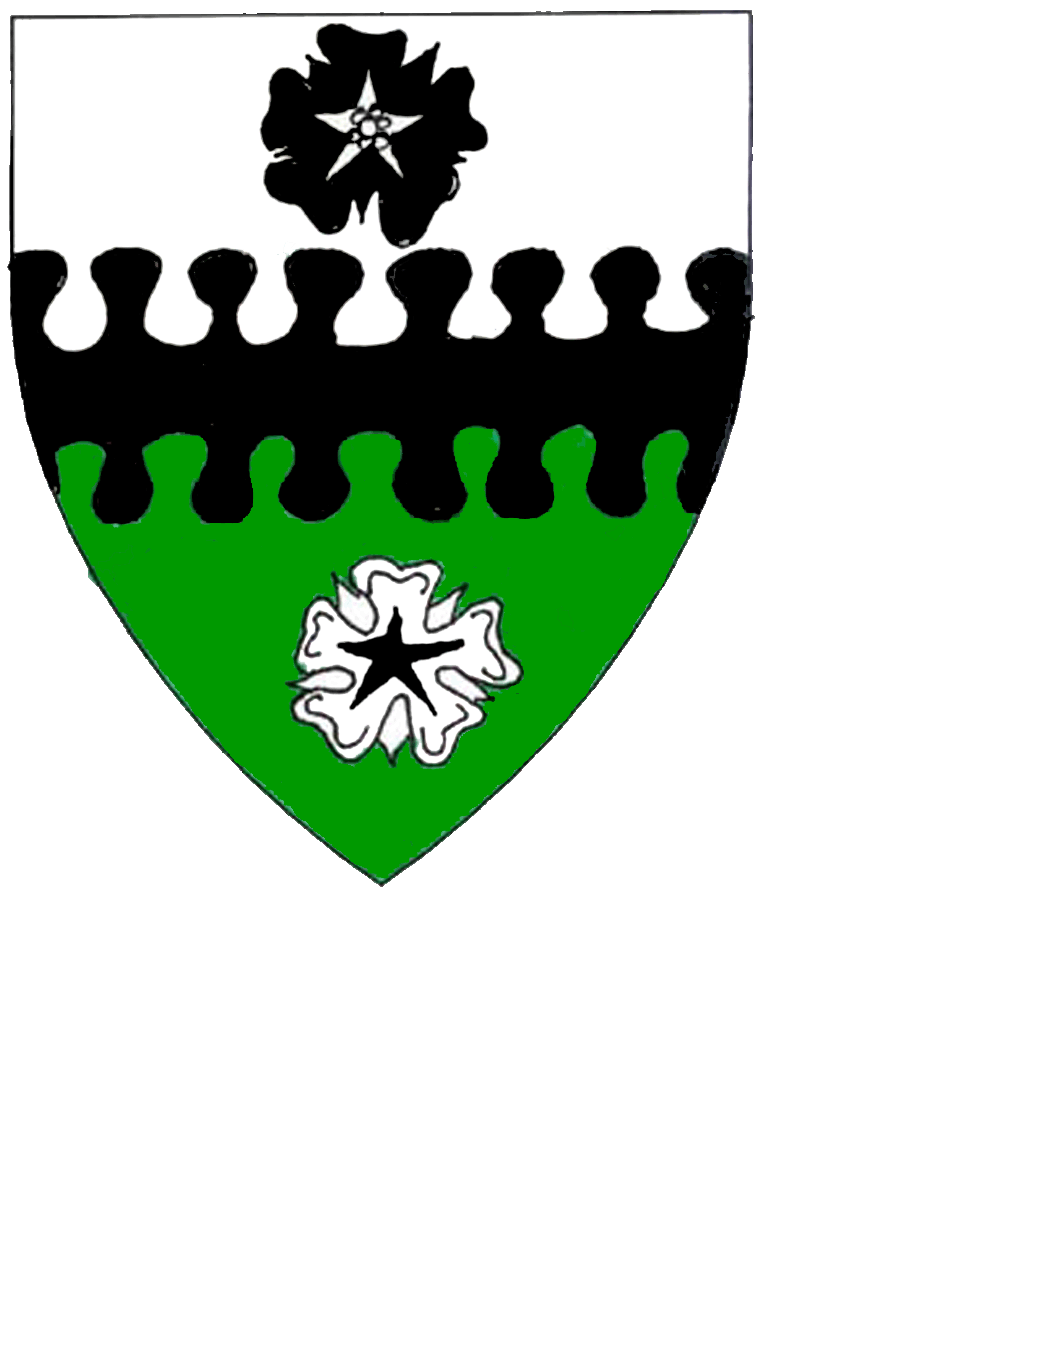 The arms of Roe Sheen